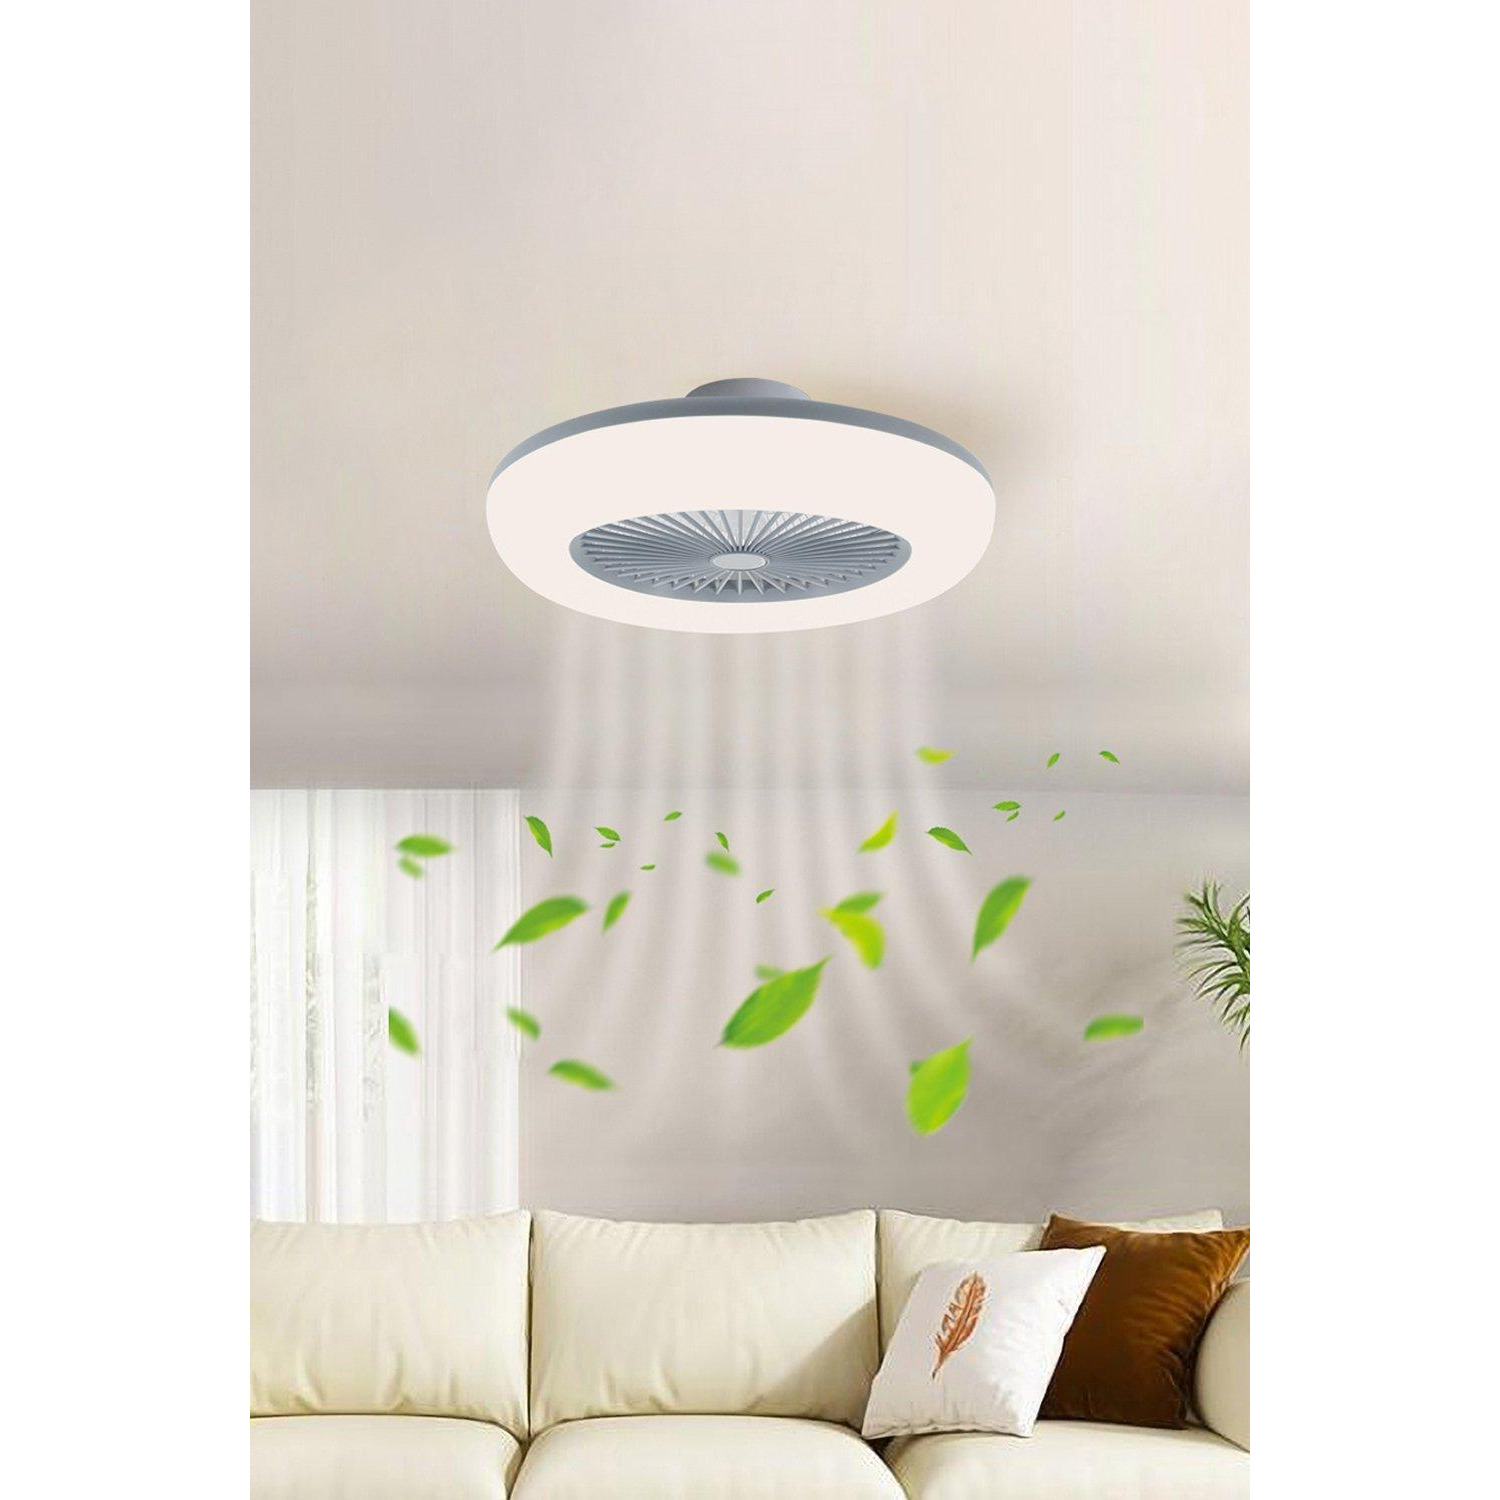 Round Acrylic Ceiling Fan with LED Light - image 1